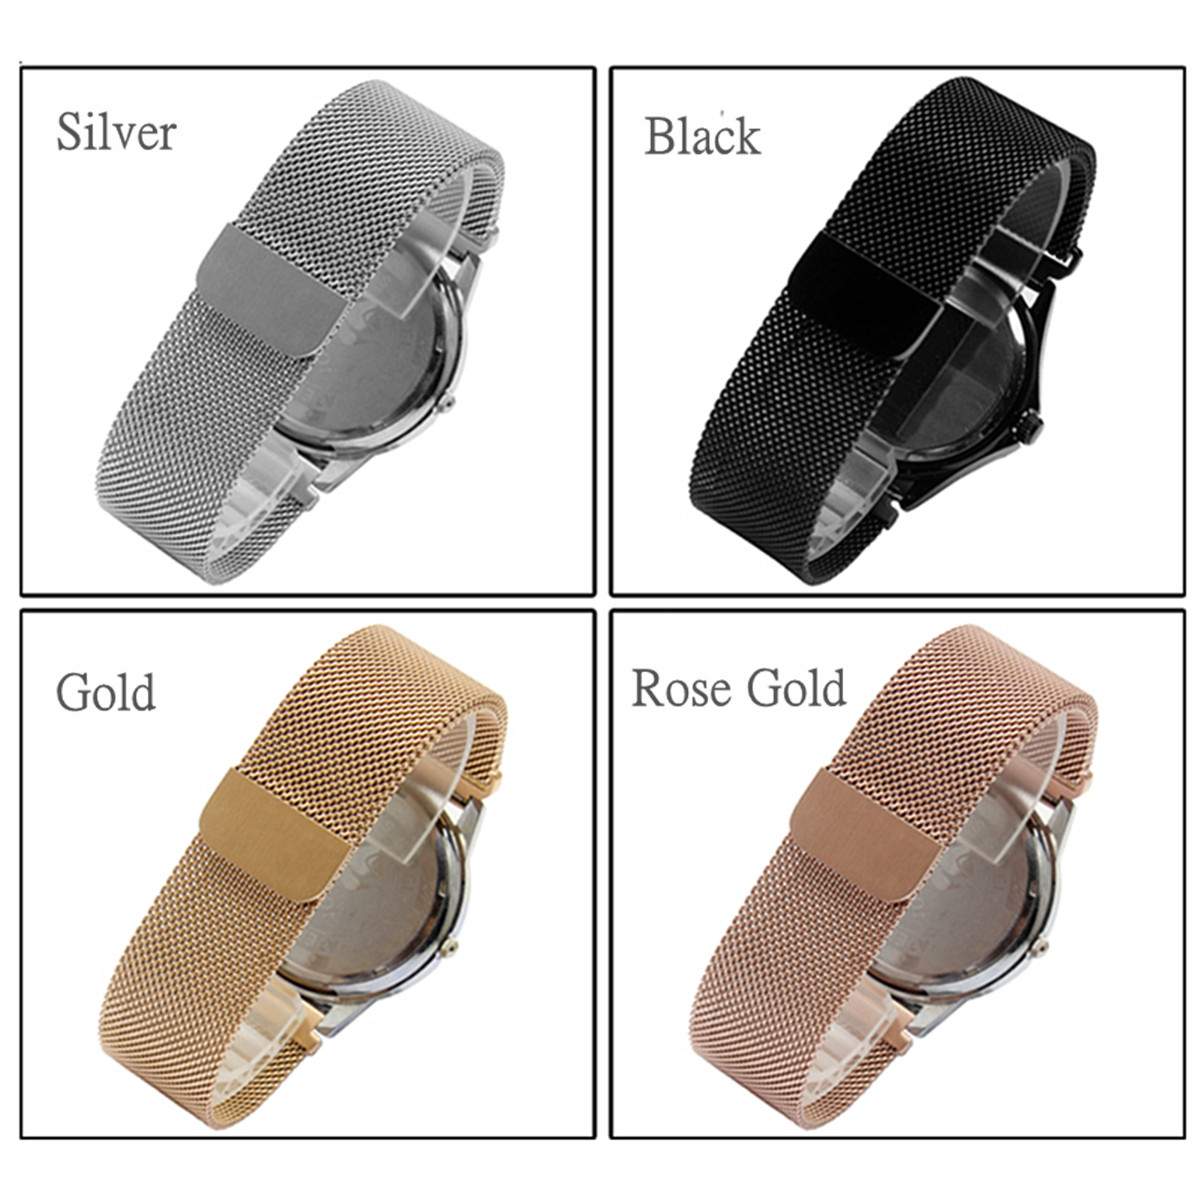 Milanese-Loop-Mesh-Metal-Watch-Band-Strap-For-Samsung-Gear-Frontier-Classic-S3-1127244